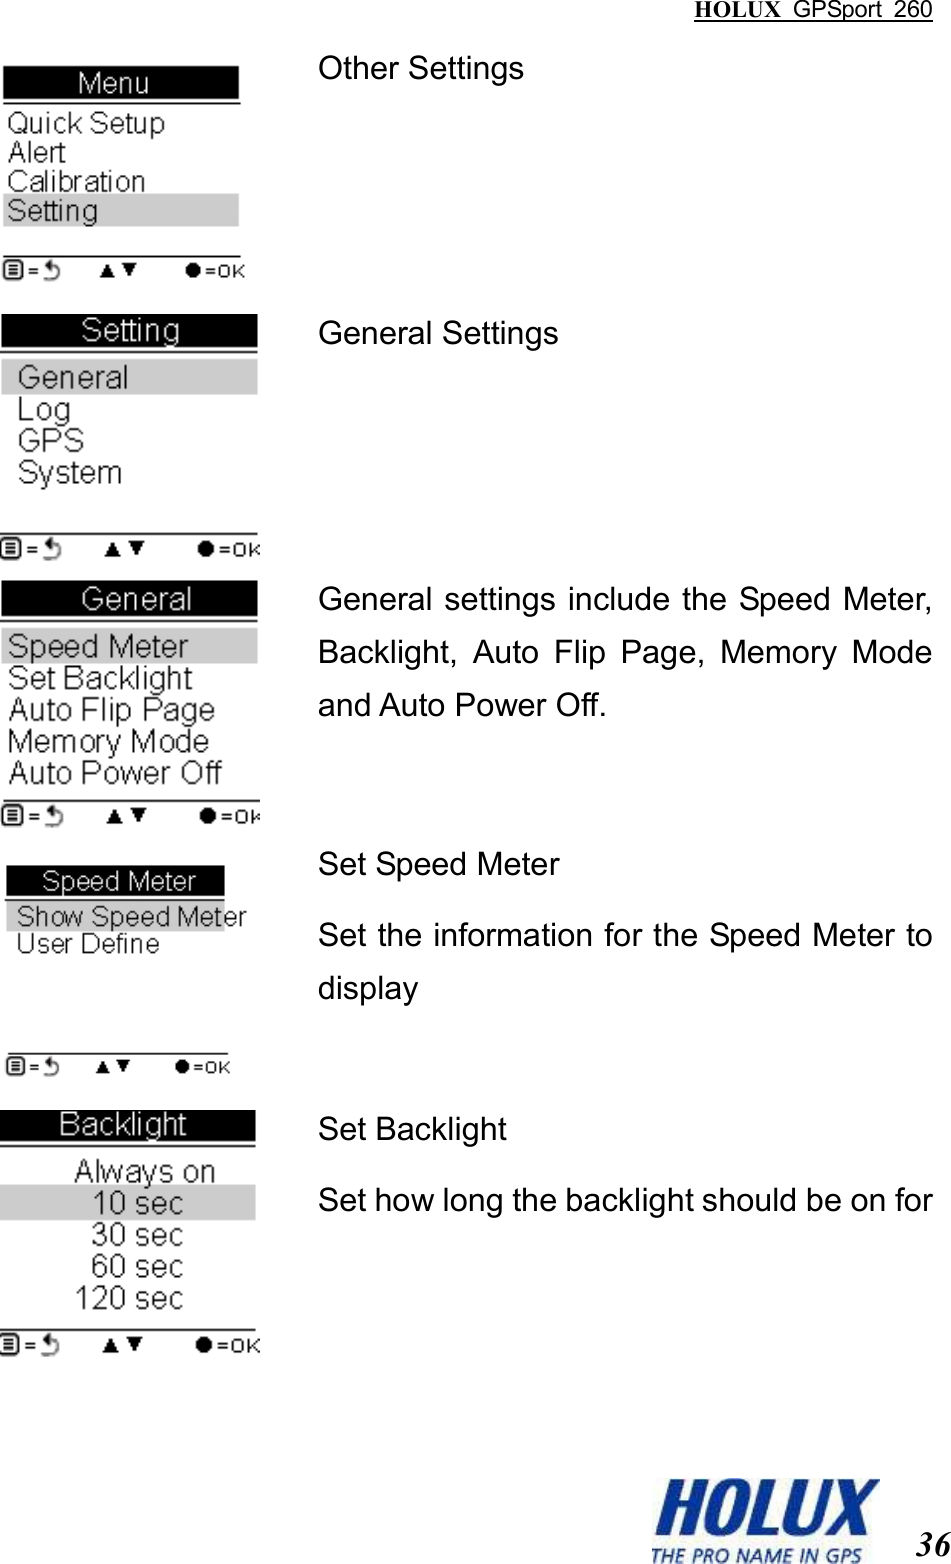 HOLUX  GPSport  260  36  Other Settings  General Settings  General settings include the Speed Meter, Backlight,  Auto  Flip  Page,  Memory  Mode and Auto Power Off.  Set Speed Meter Set the information for the Speed Meter to display  Set Backlight Set how long the backlight should be on for 